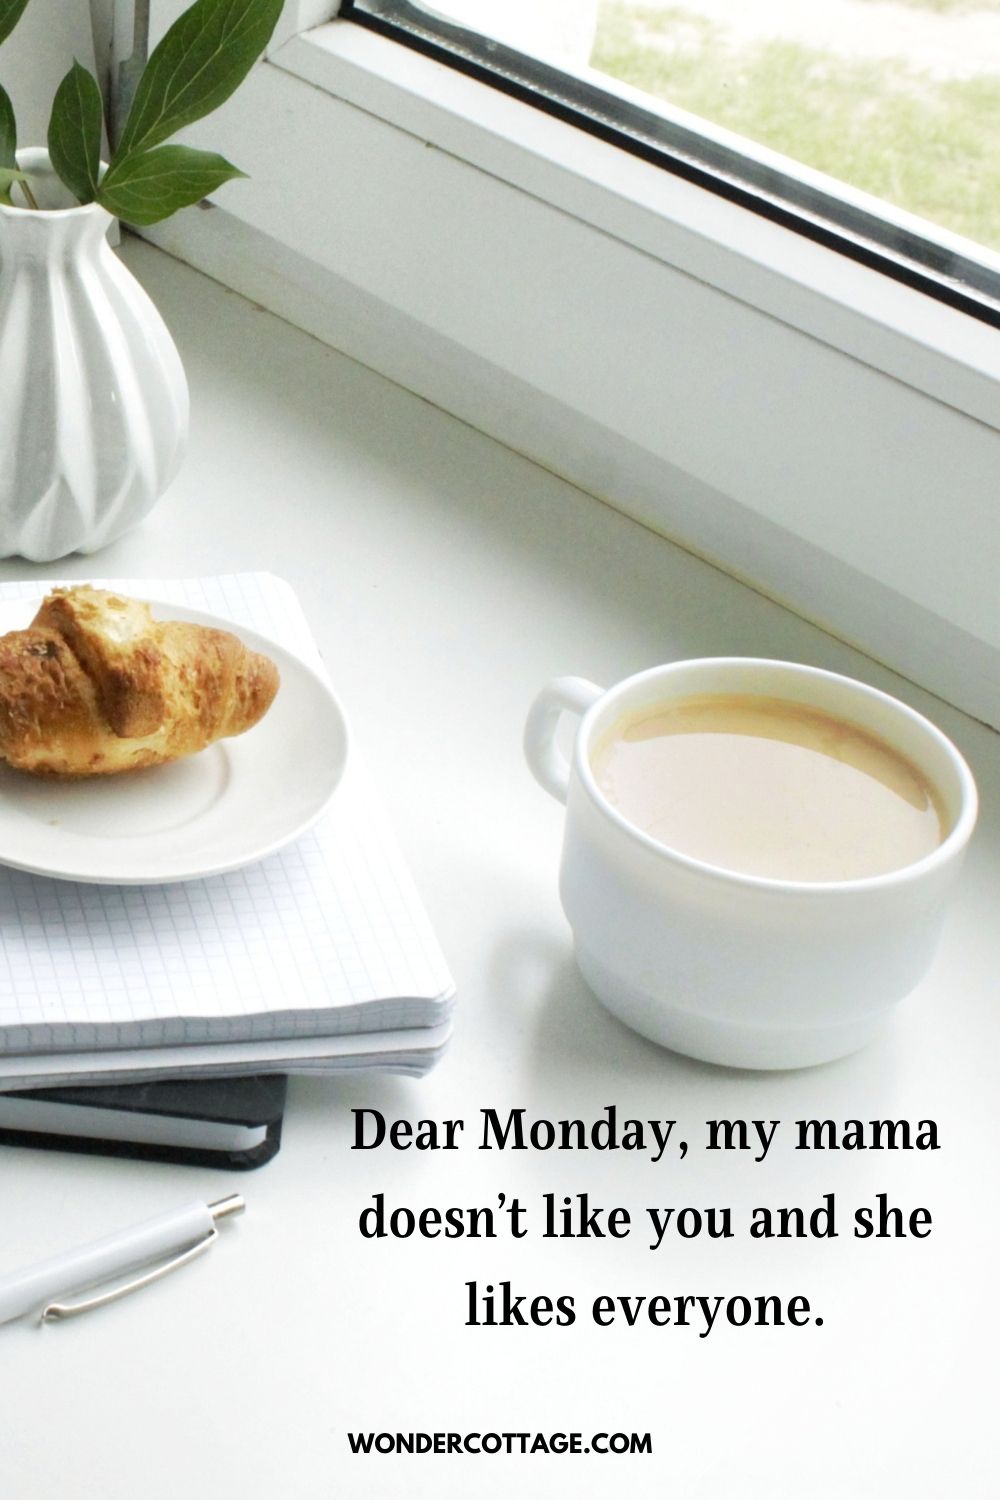 Dear Monday, my mama doesn’t like you and she likes everyone.